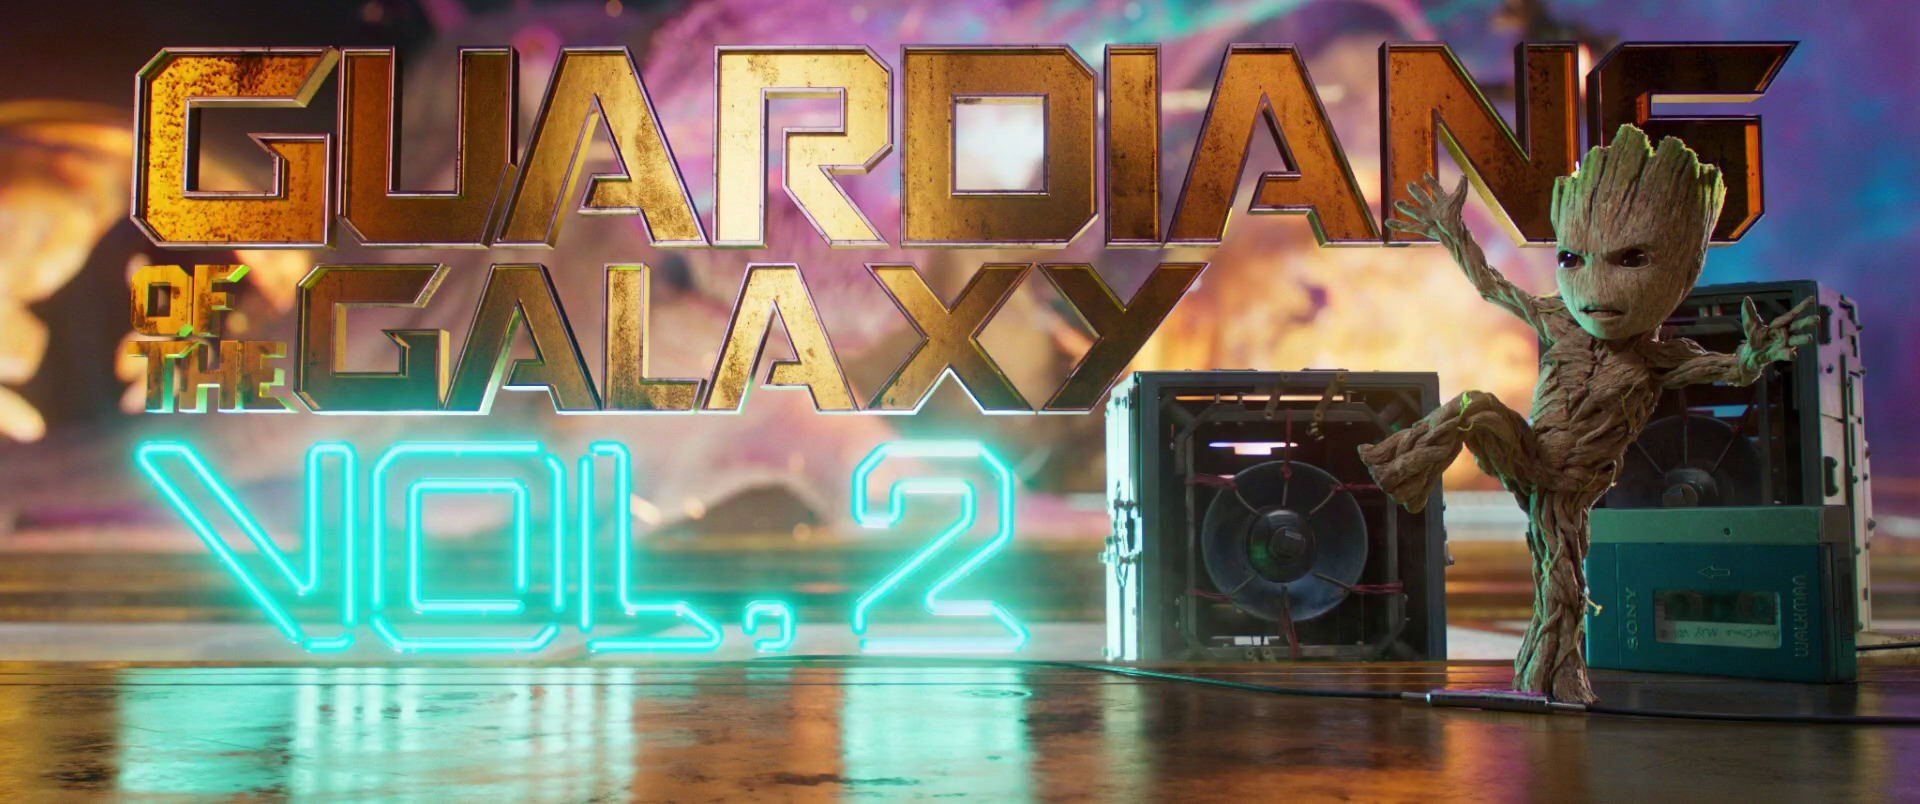 baby groot dancing in front of the guardians of the galaxy 2 logo